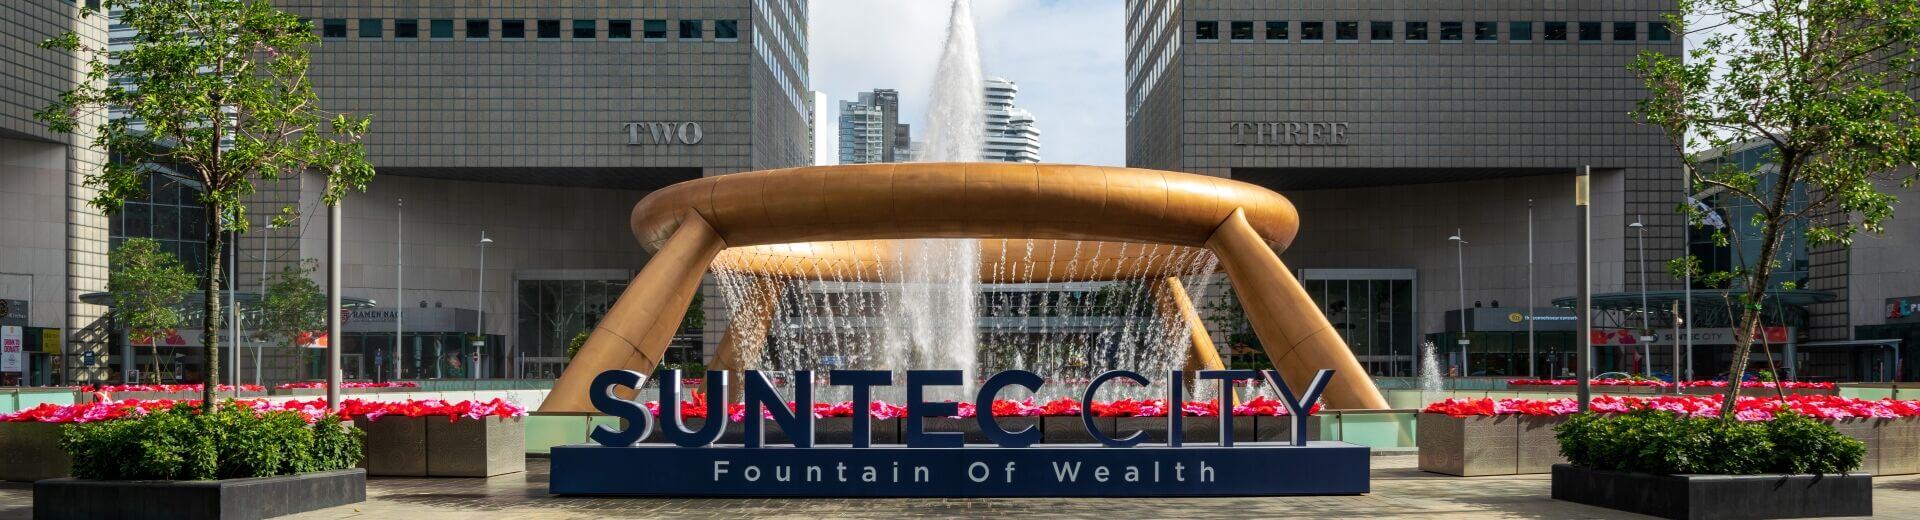 Fountain of Wealth - JAMES COPPELL LEE